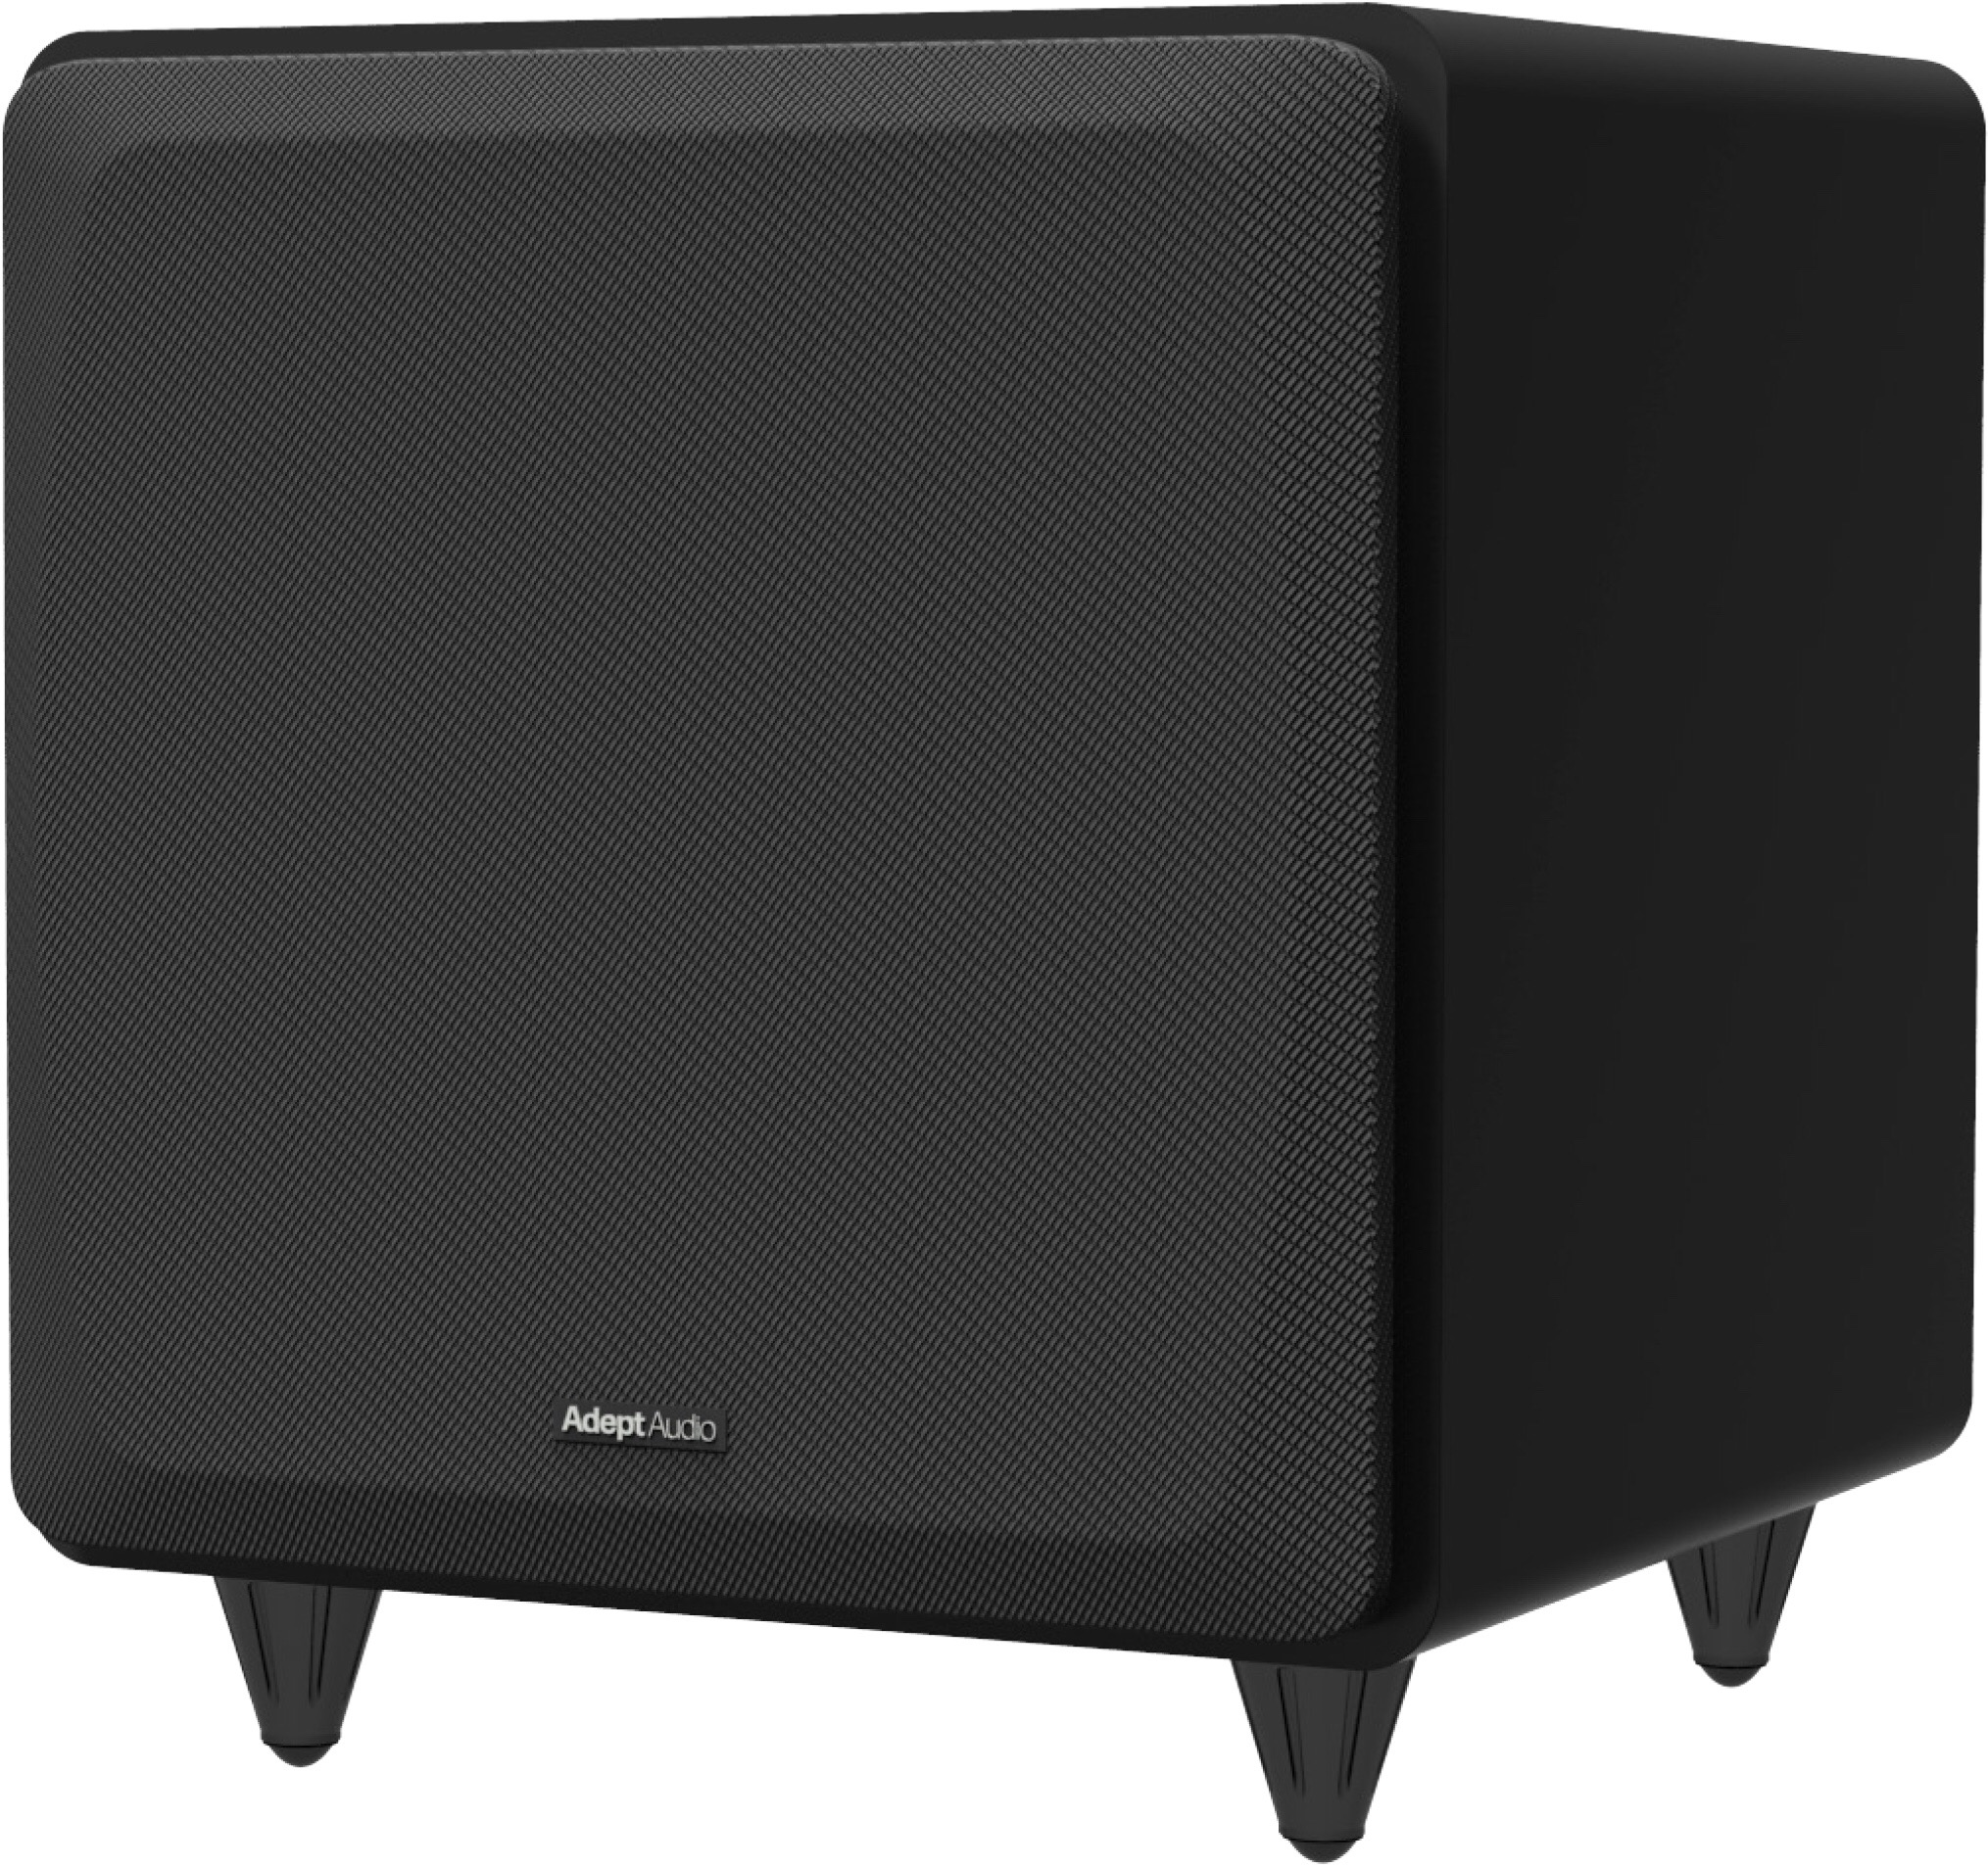 Self-Powered Subwoofer (Dual Woofer 10 inch) - Adept Audio - ADS10